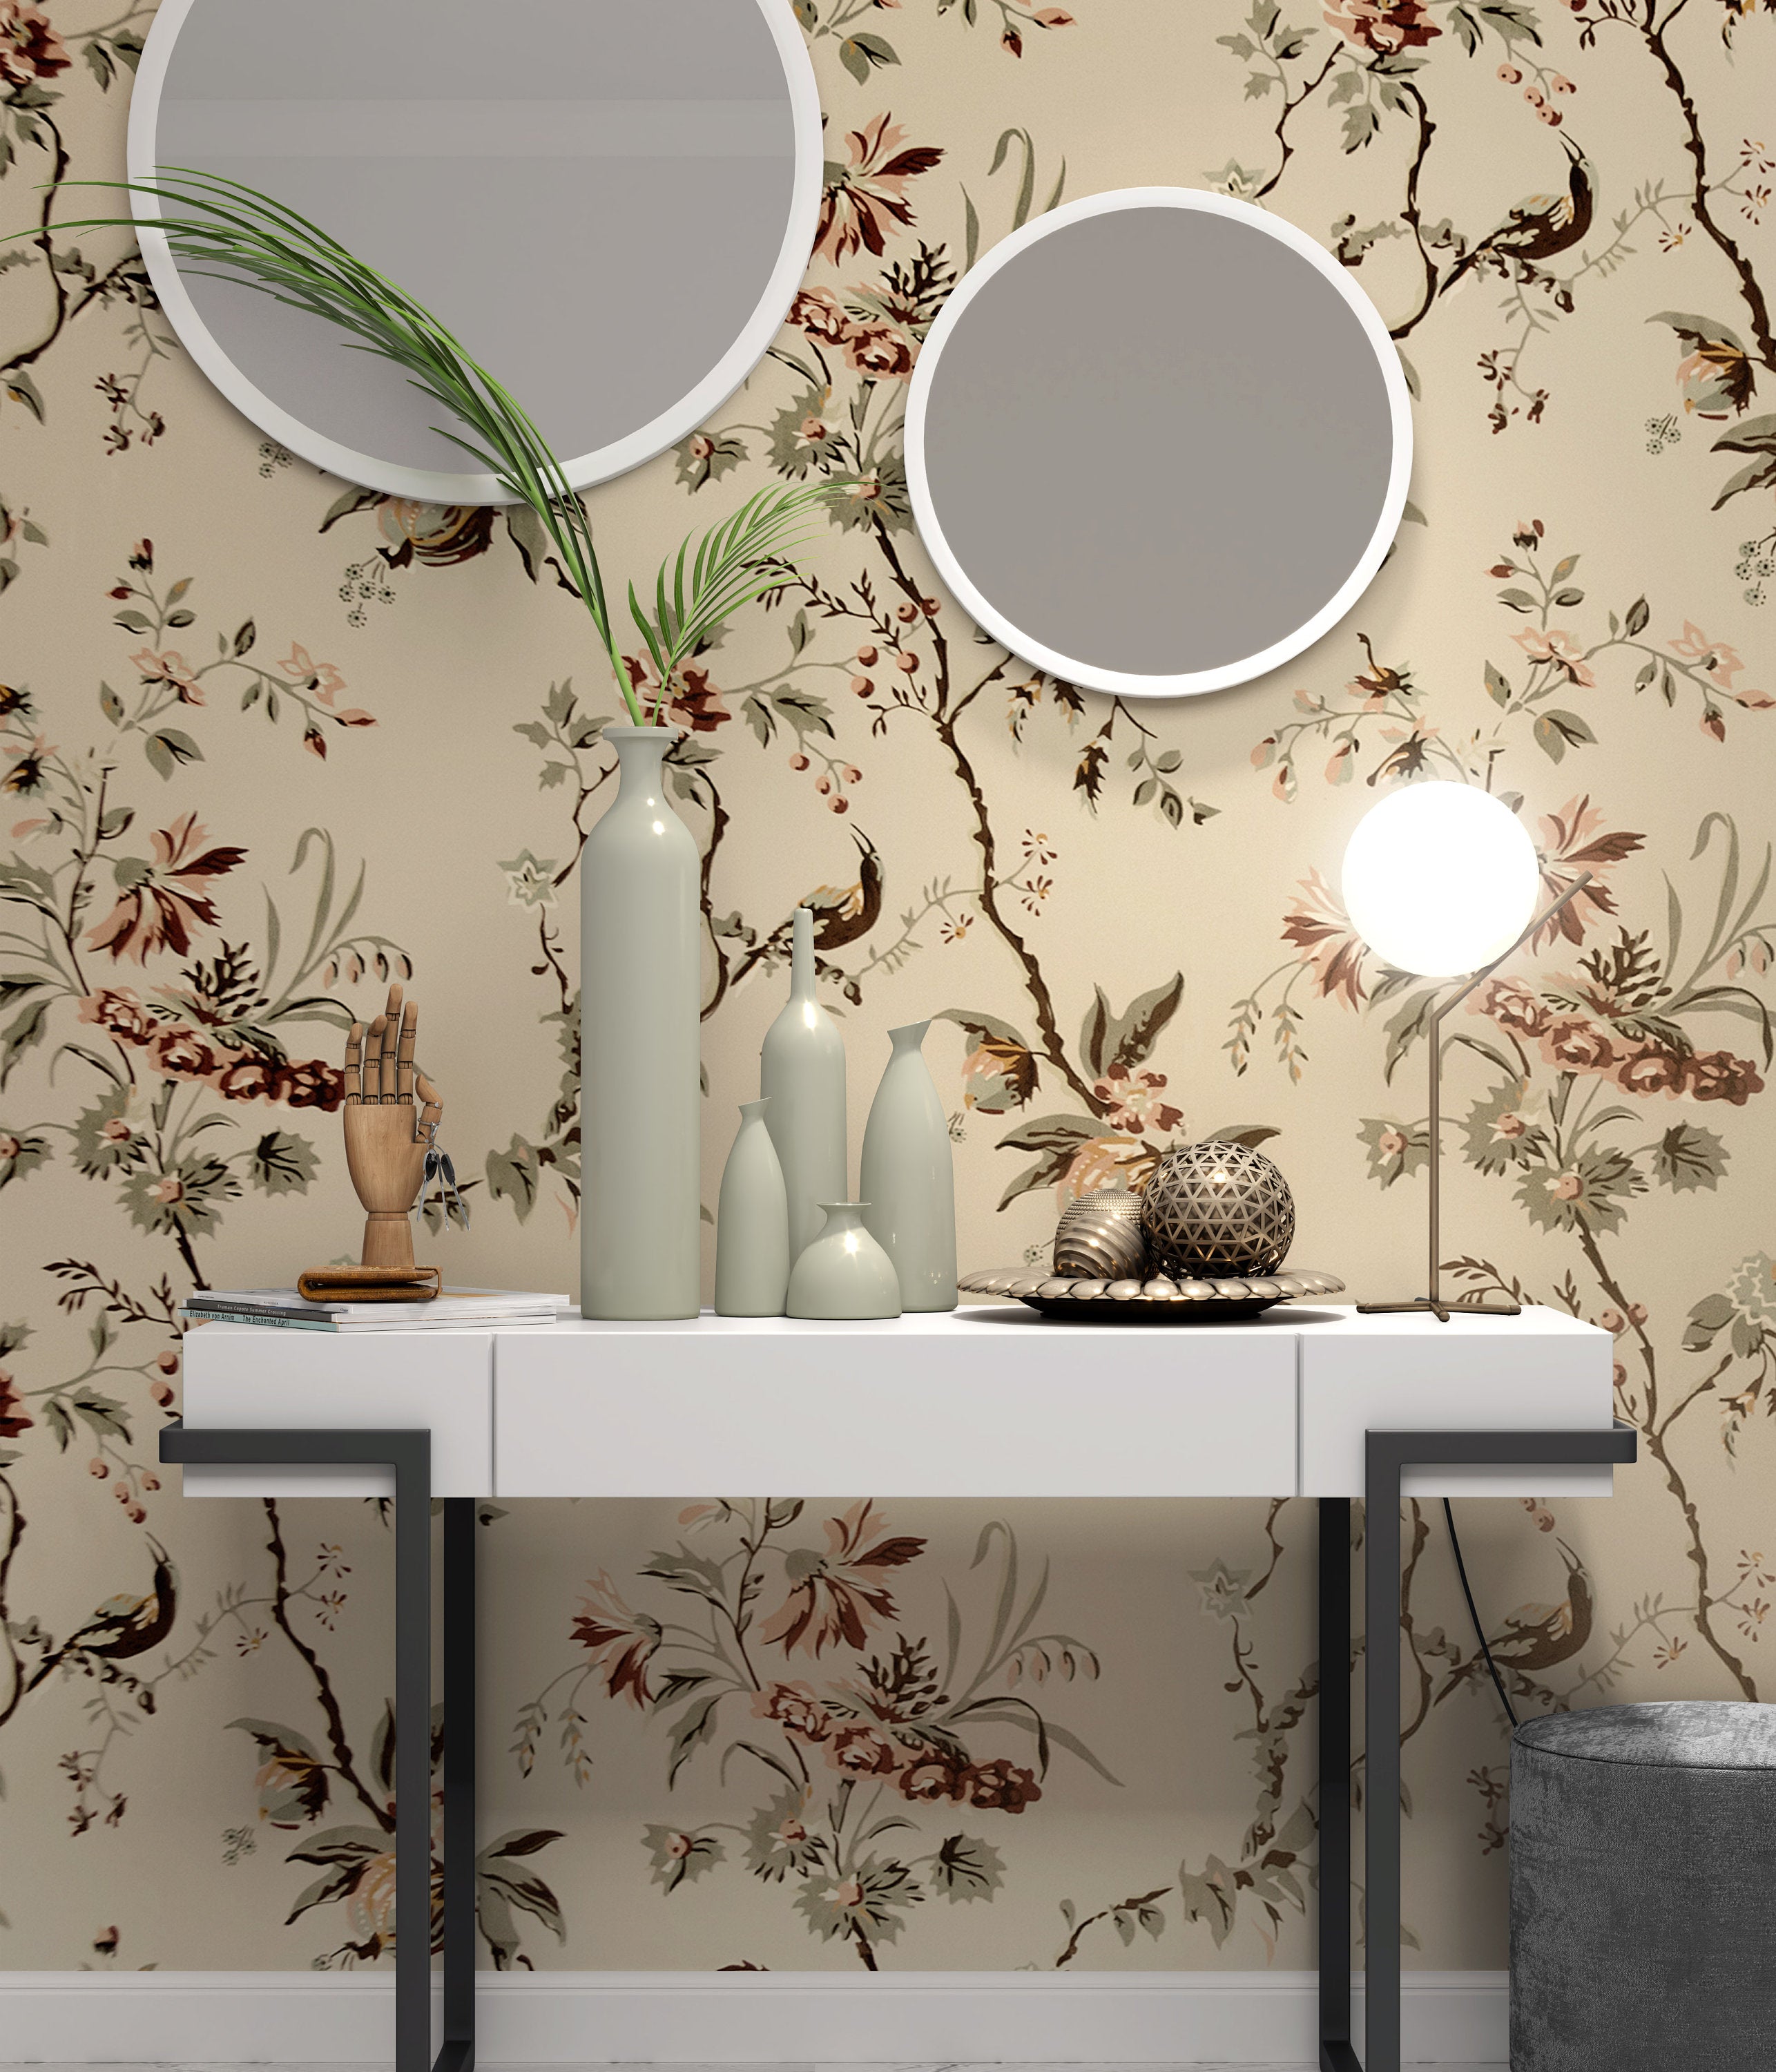 Vintage Style Floral Pattern 18th Century Luxury Wallpaper Self Adhesive Peel and Stick Wall Sticker Wall Decoration Removable